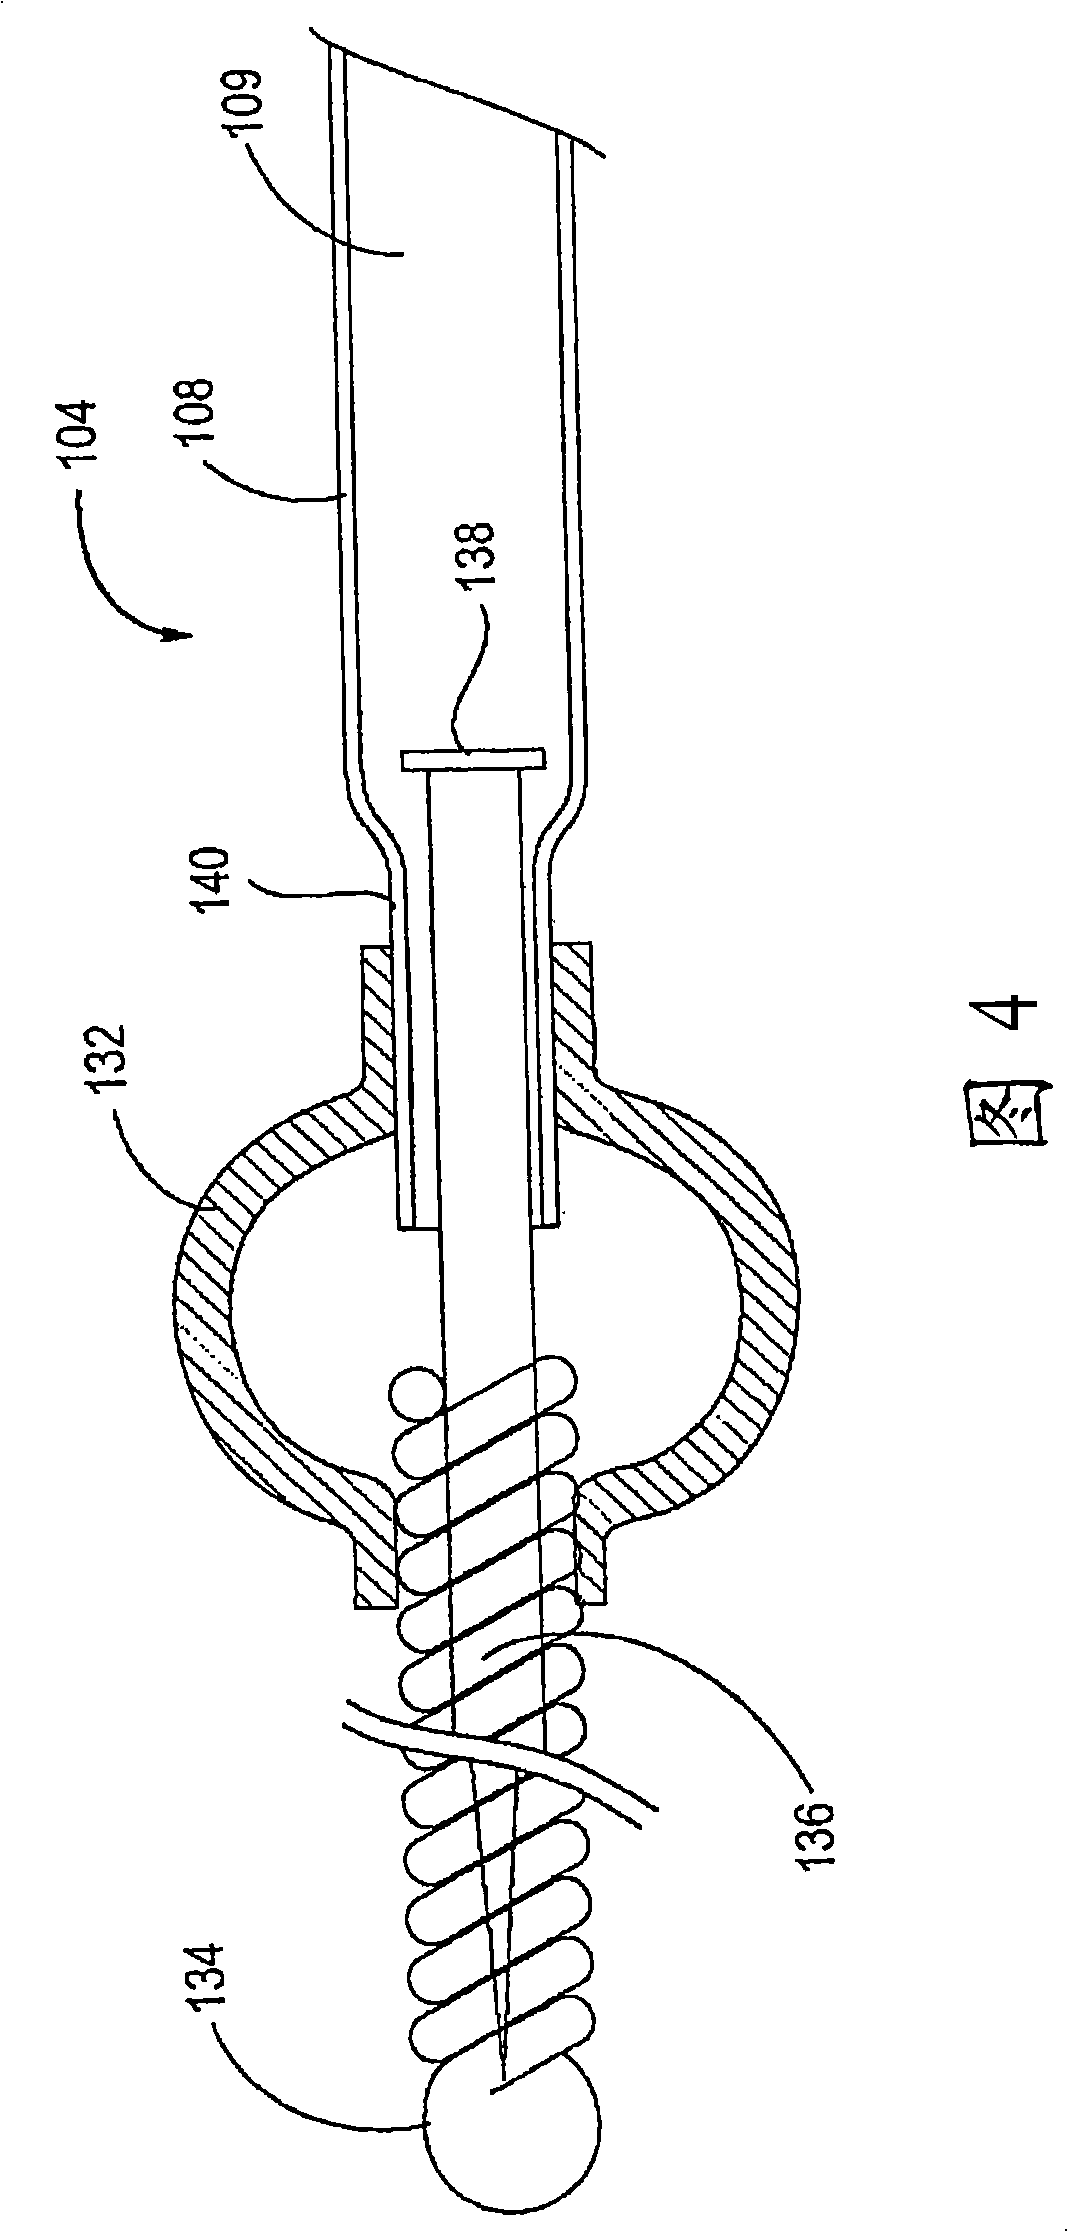 Apparatus and methods for protected angioplasty and stenting at a carotid bifurcation